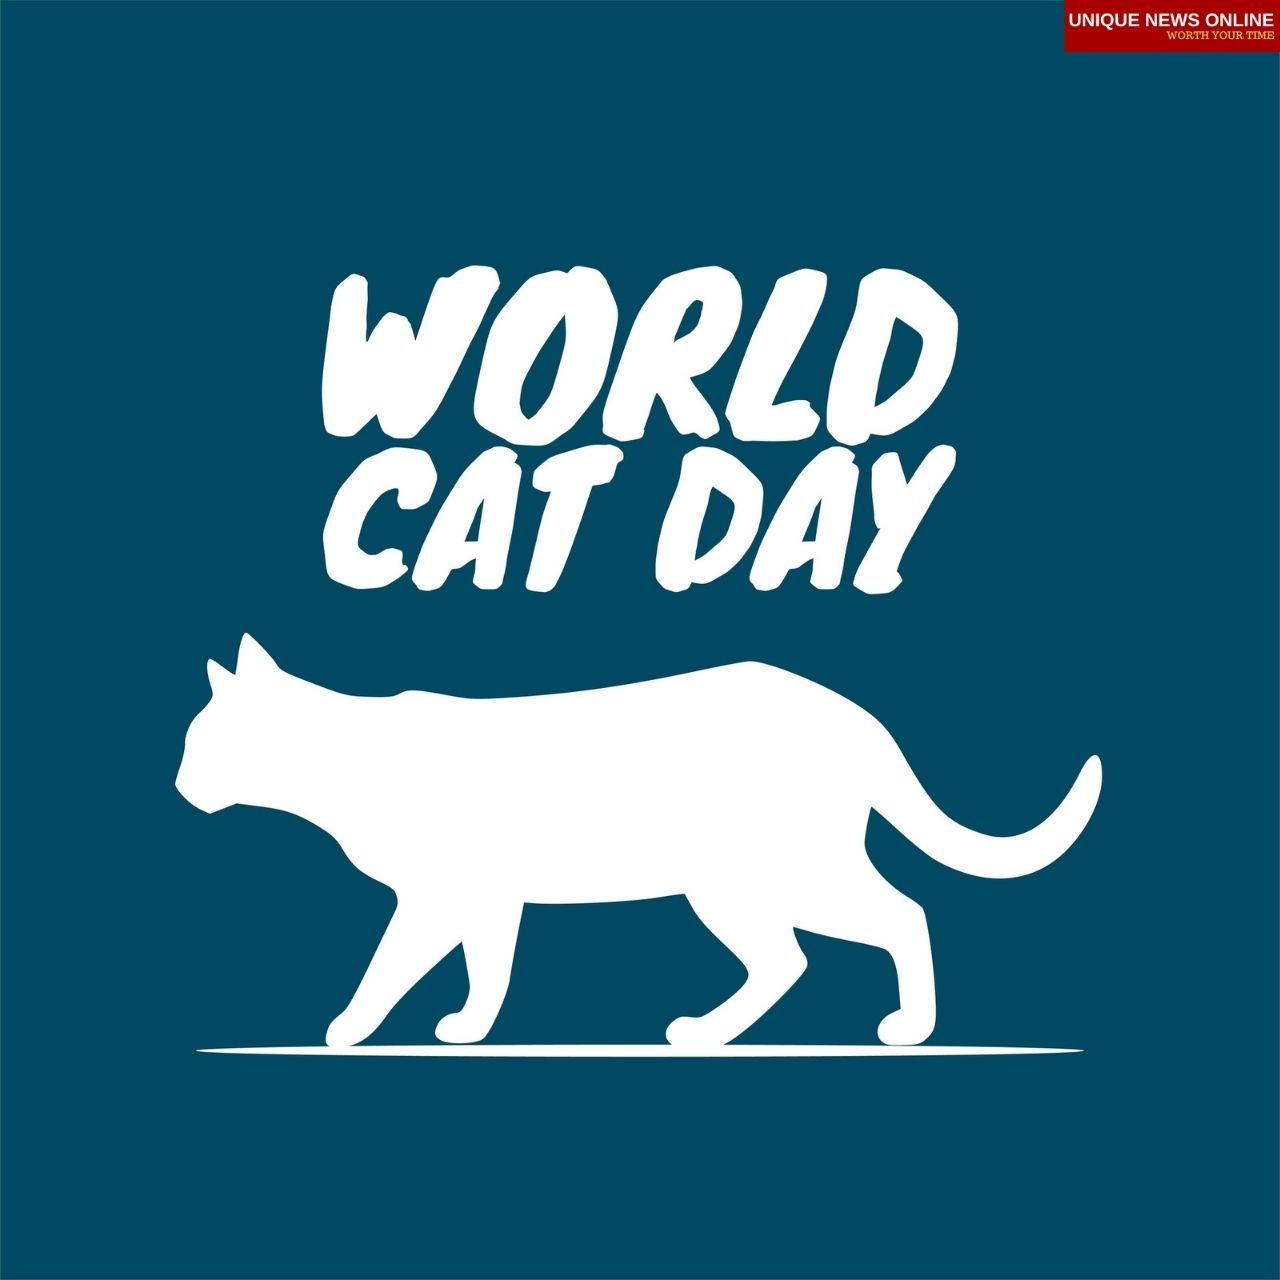 International Cat Day 2021 Quotes, Poster, Images, Memes, Messages, and Greetings to Share